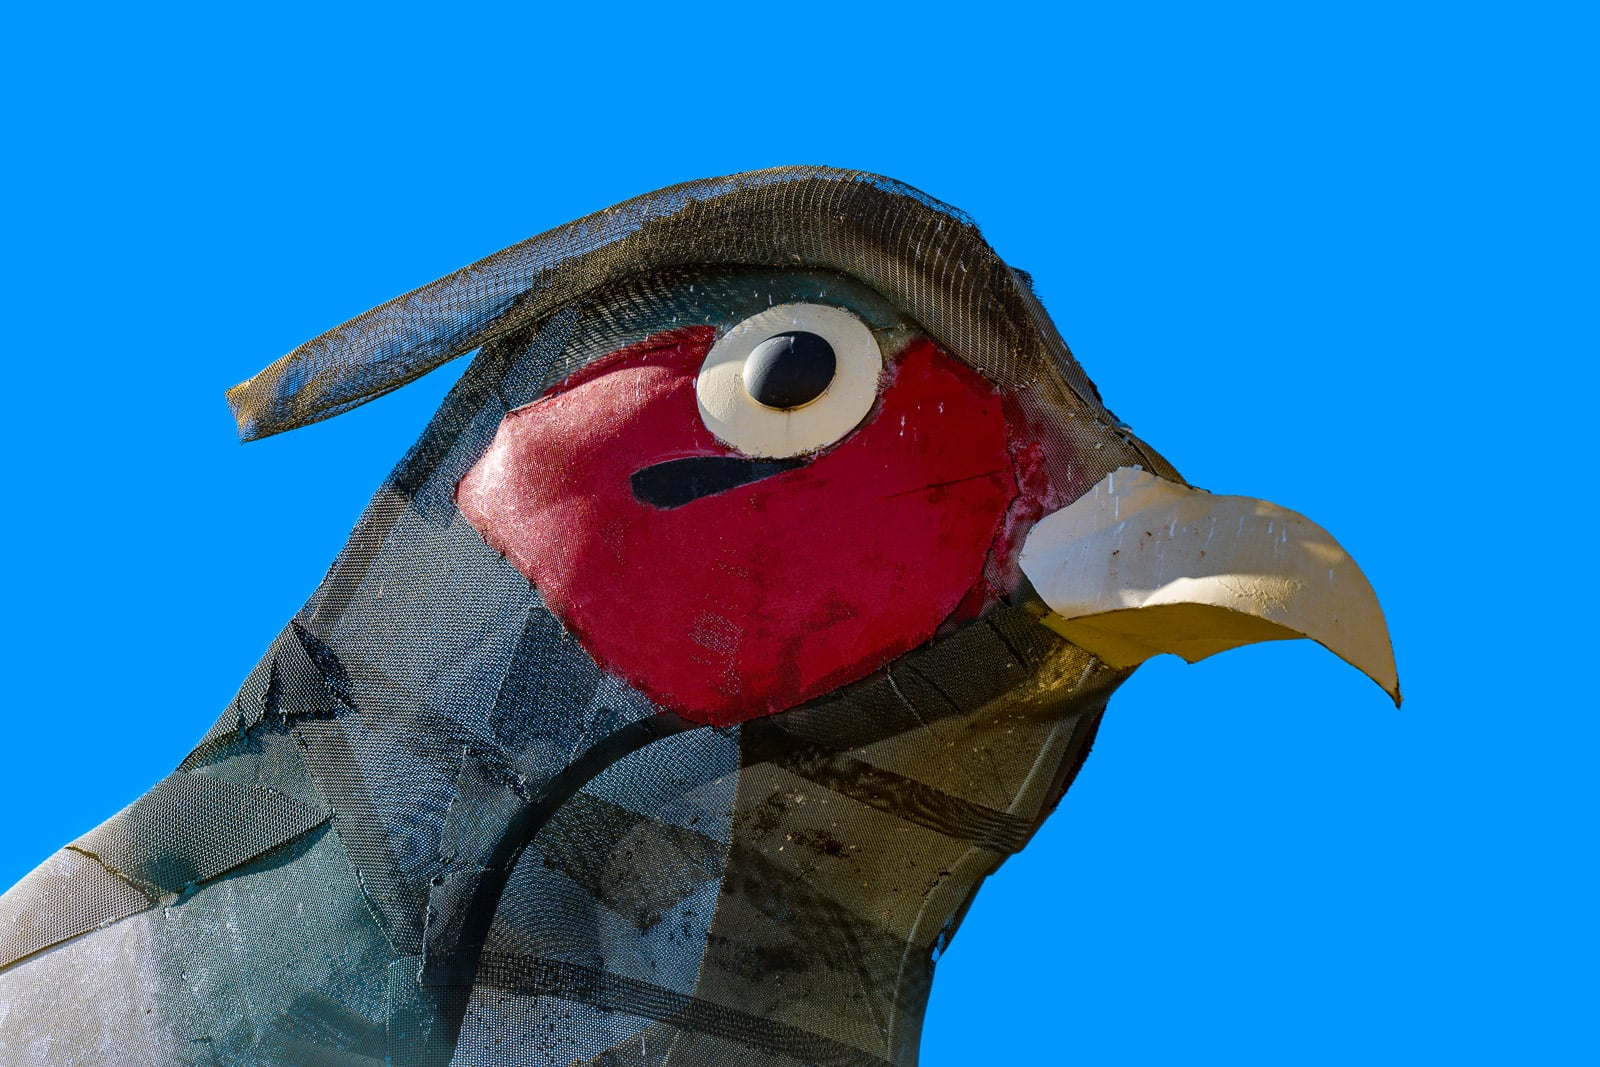 This is a detail of the head of the male pheasant in the sculpture by Gary Greff called Pheasants on the Prairie, located along the Enchanted Highway running between I-94 and Regent, North Dakota.